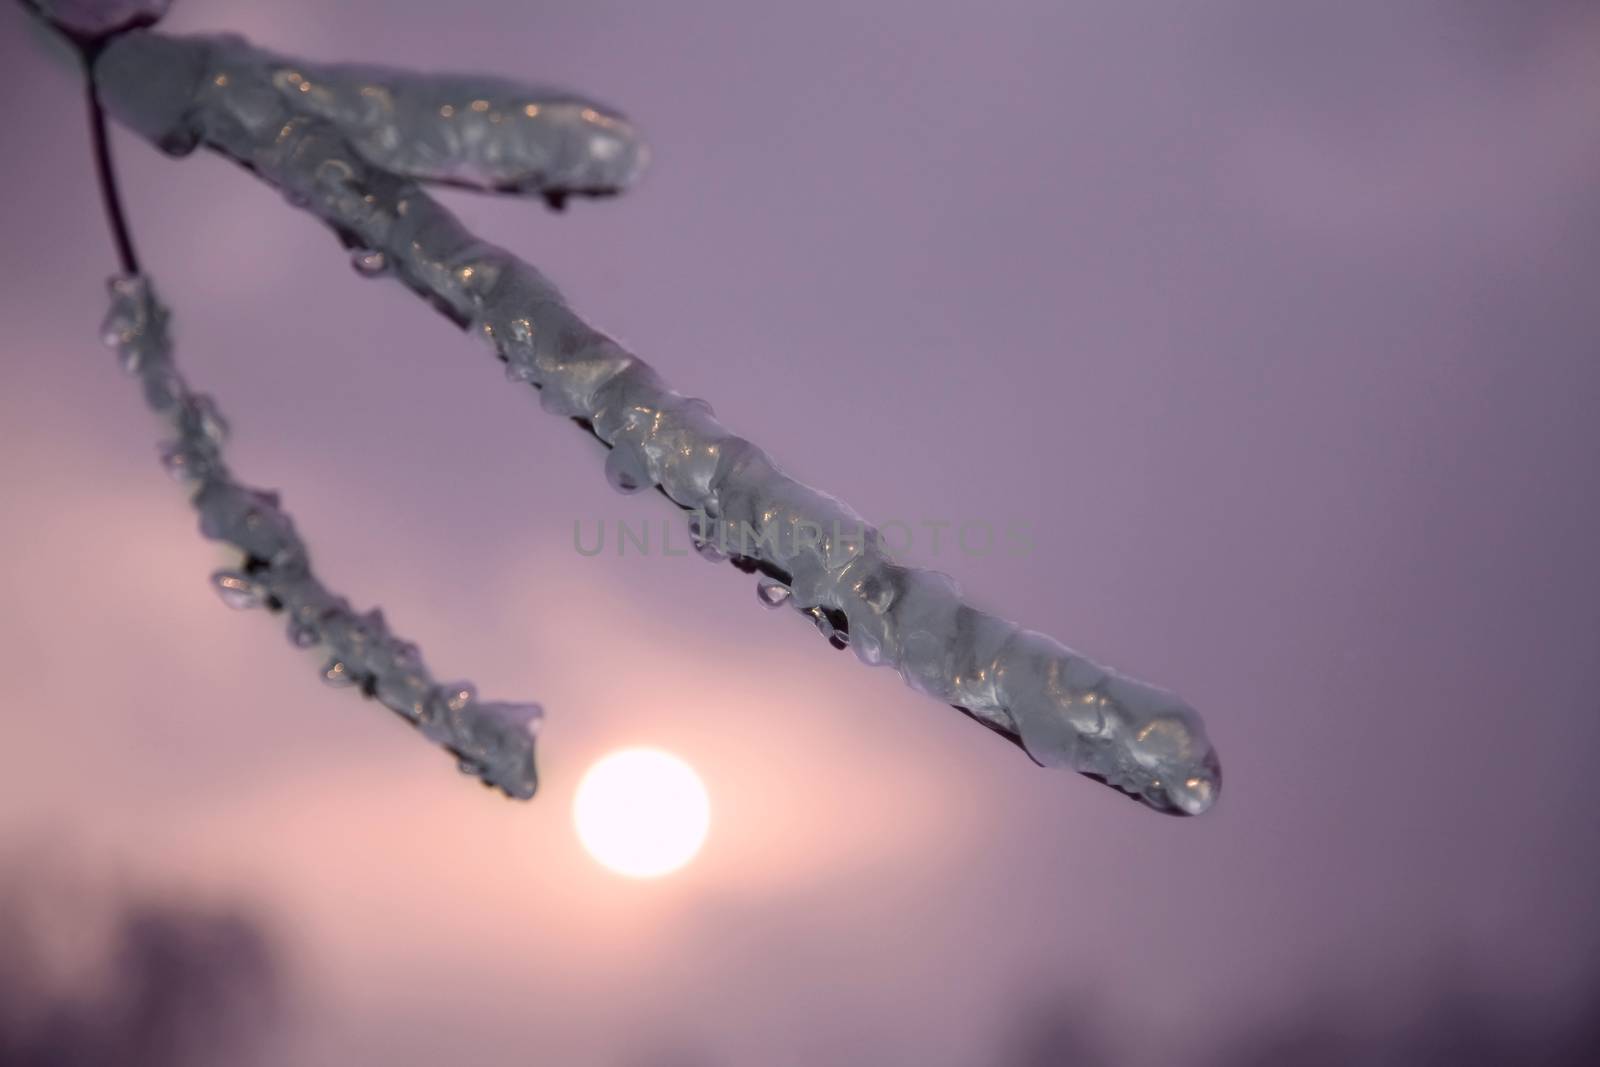  ice on twig of  tree. park with trees in ise. Winter forest